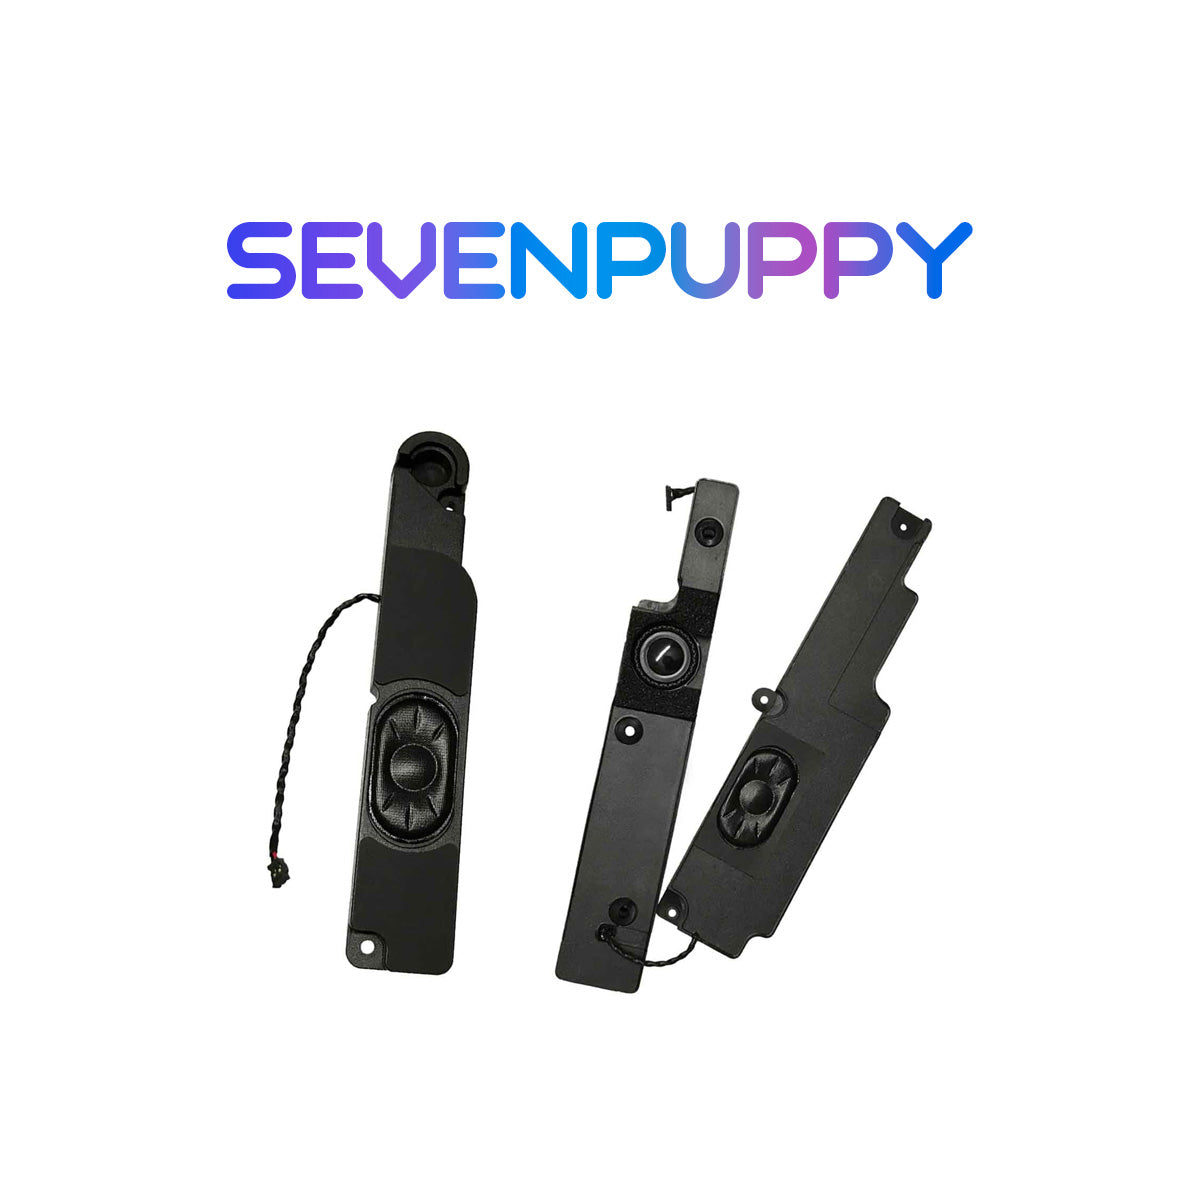 SEVEN PUPPY Brand NEW Left and Right Speaker Set Pair For Macbook Pro 15" A1286 2009-2012 Year Internal Speaker